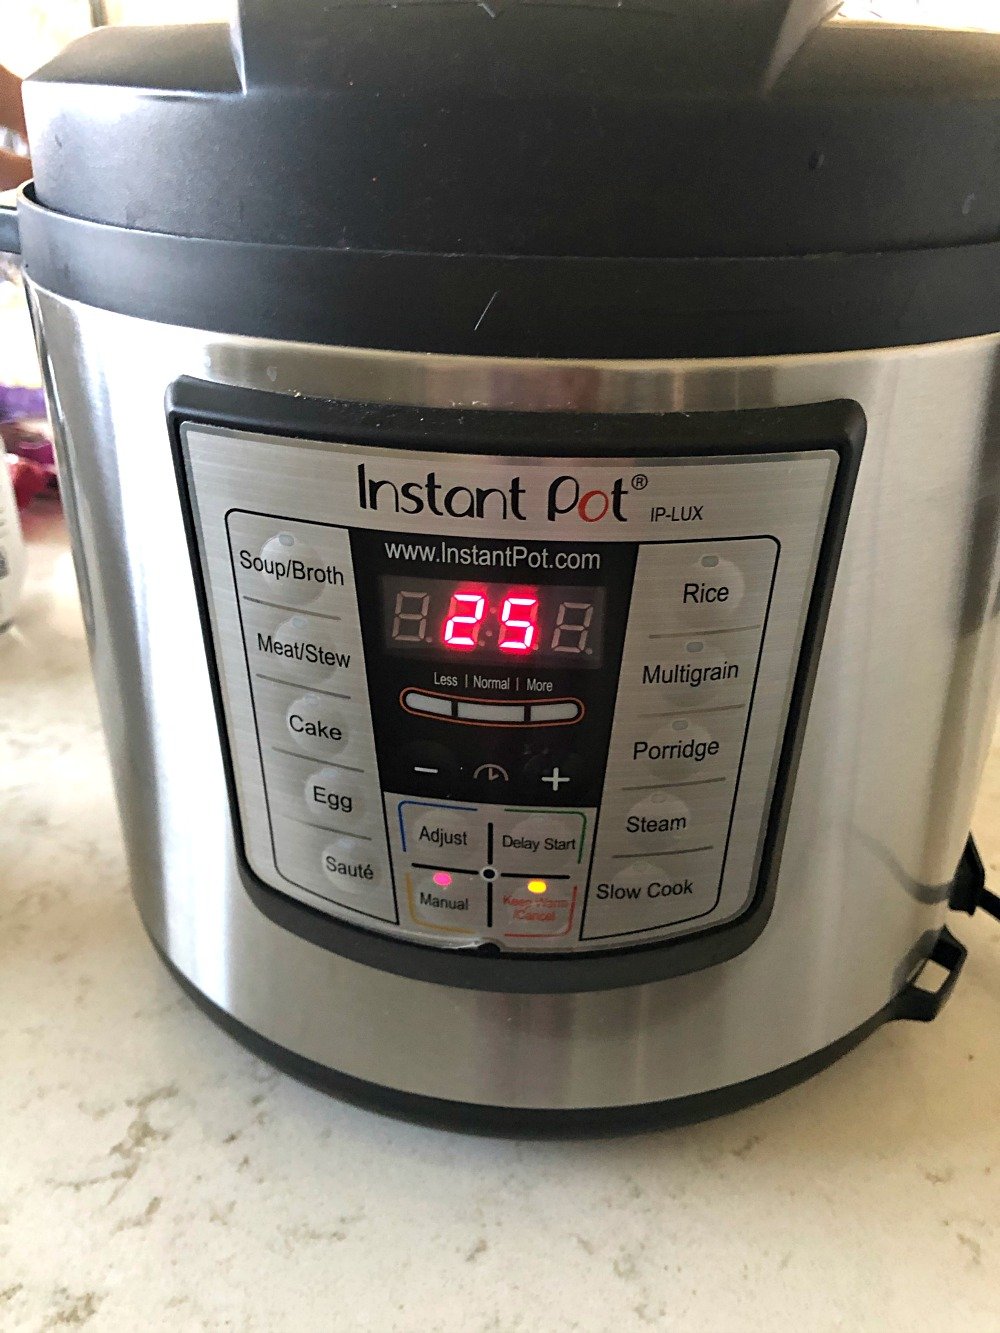 Timer set on the instant pot for 25 minutes on manual pressure